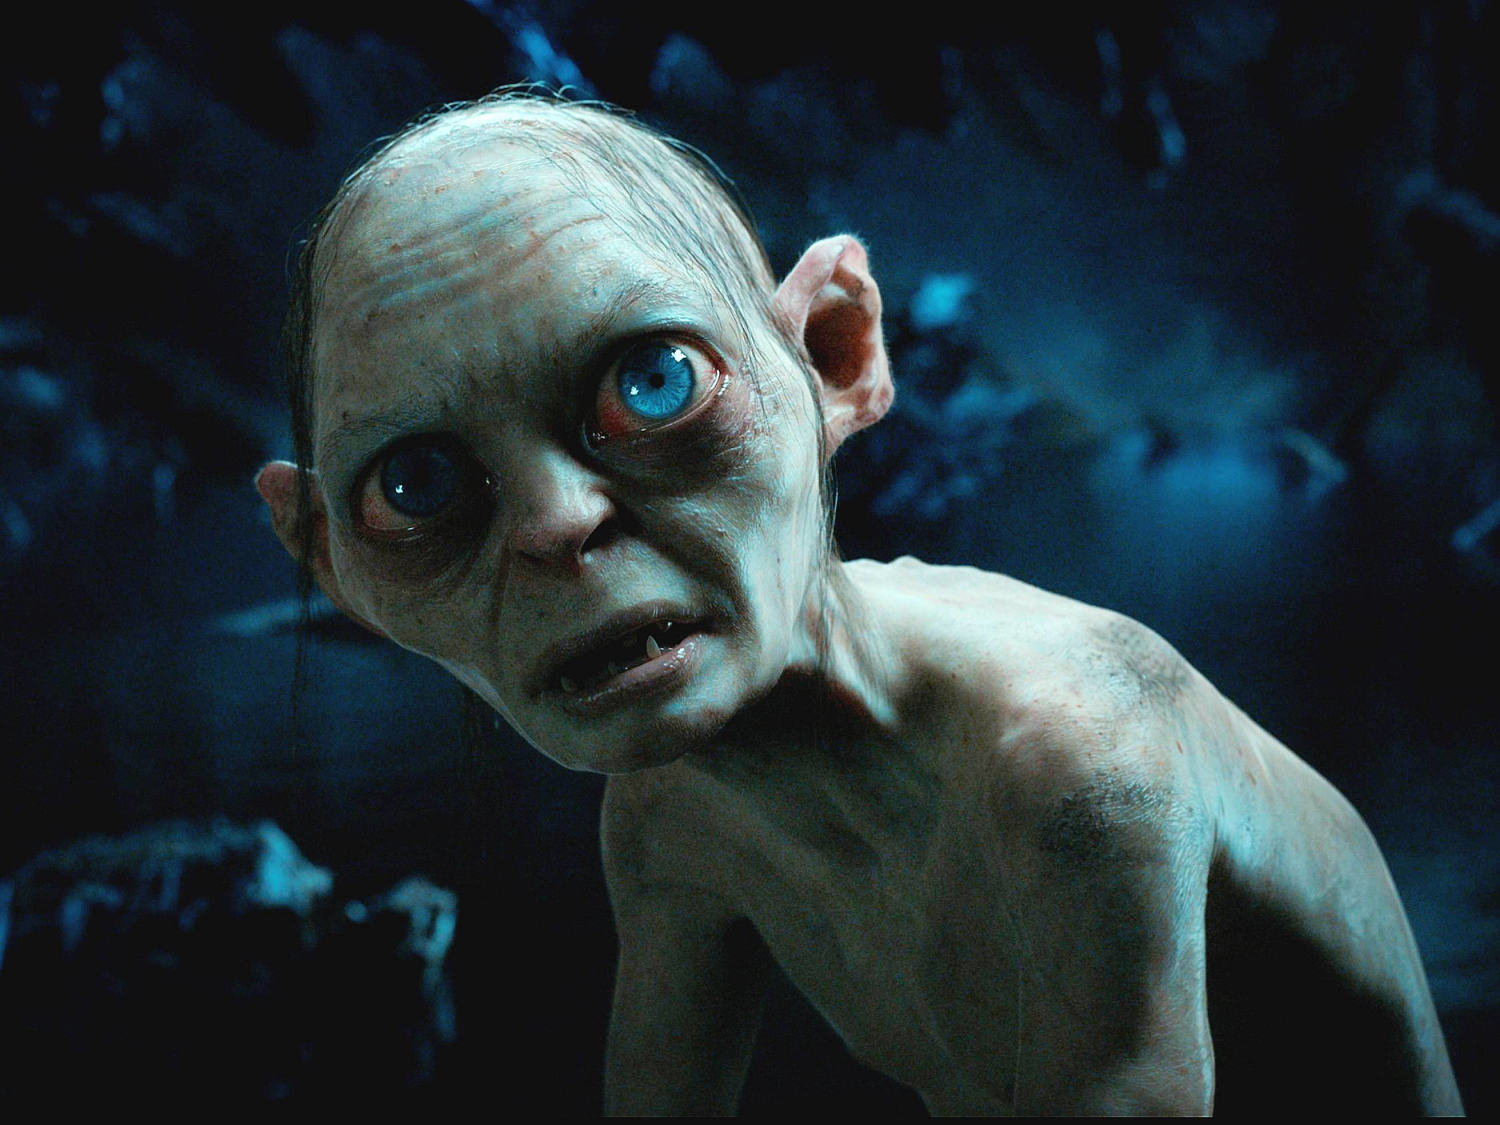 New 'Lord of the Rings' movie, 'The Hunt for Gollum,' being produced by Peter Jackson